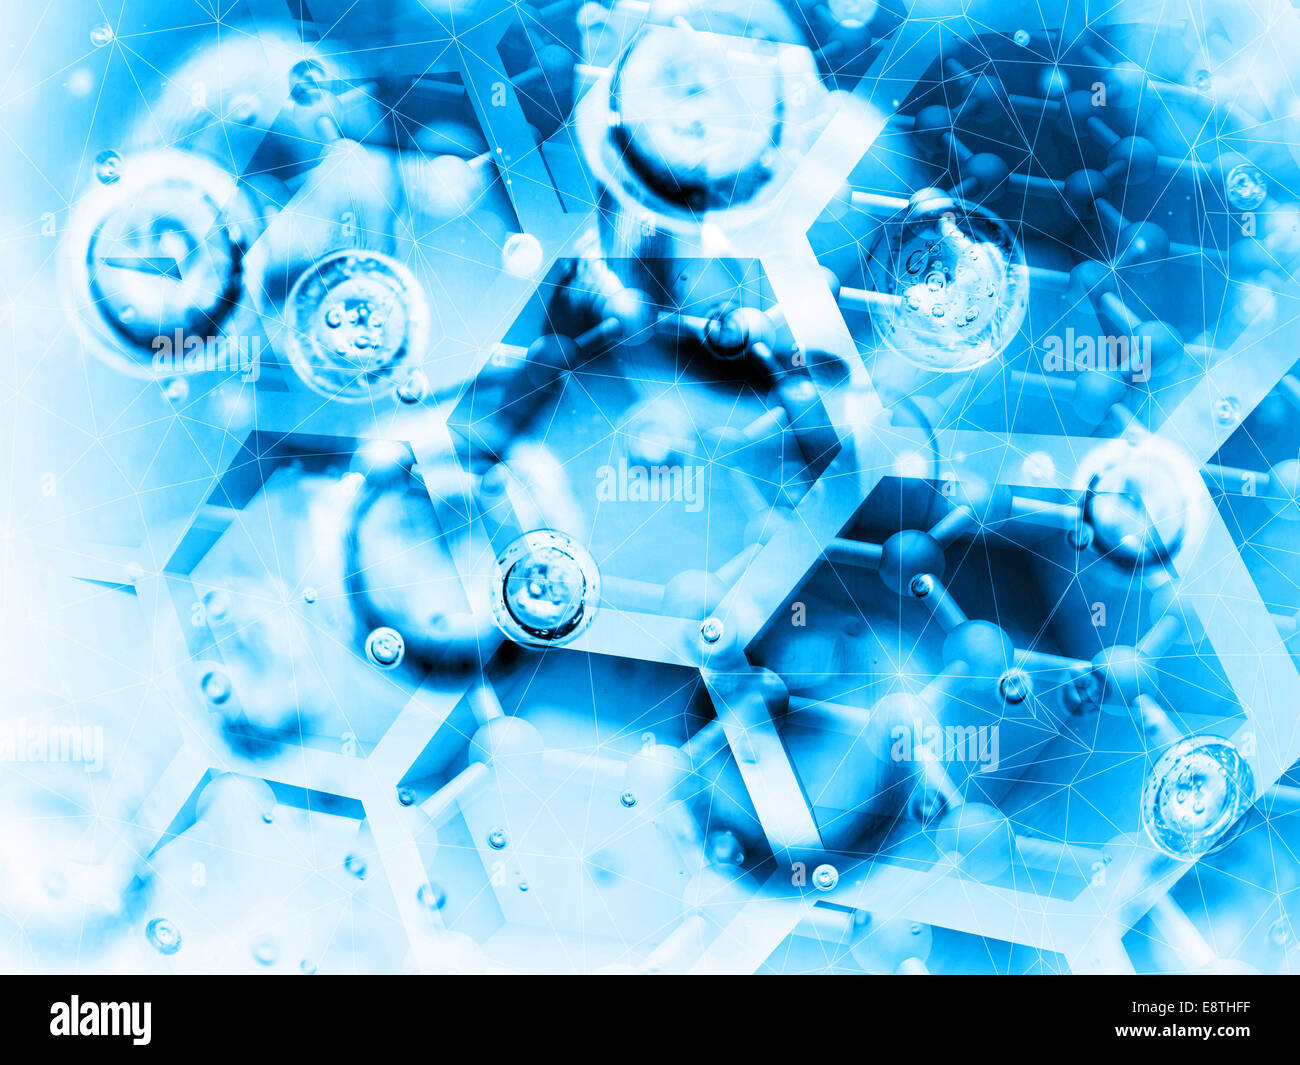 Science background illustration, bright blue chemical molecular structures Stock Photo